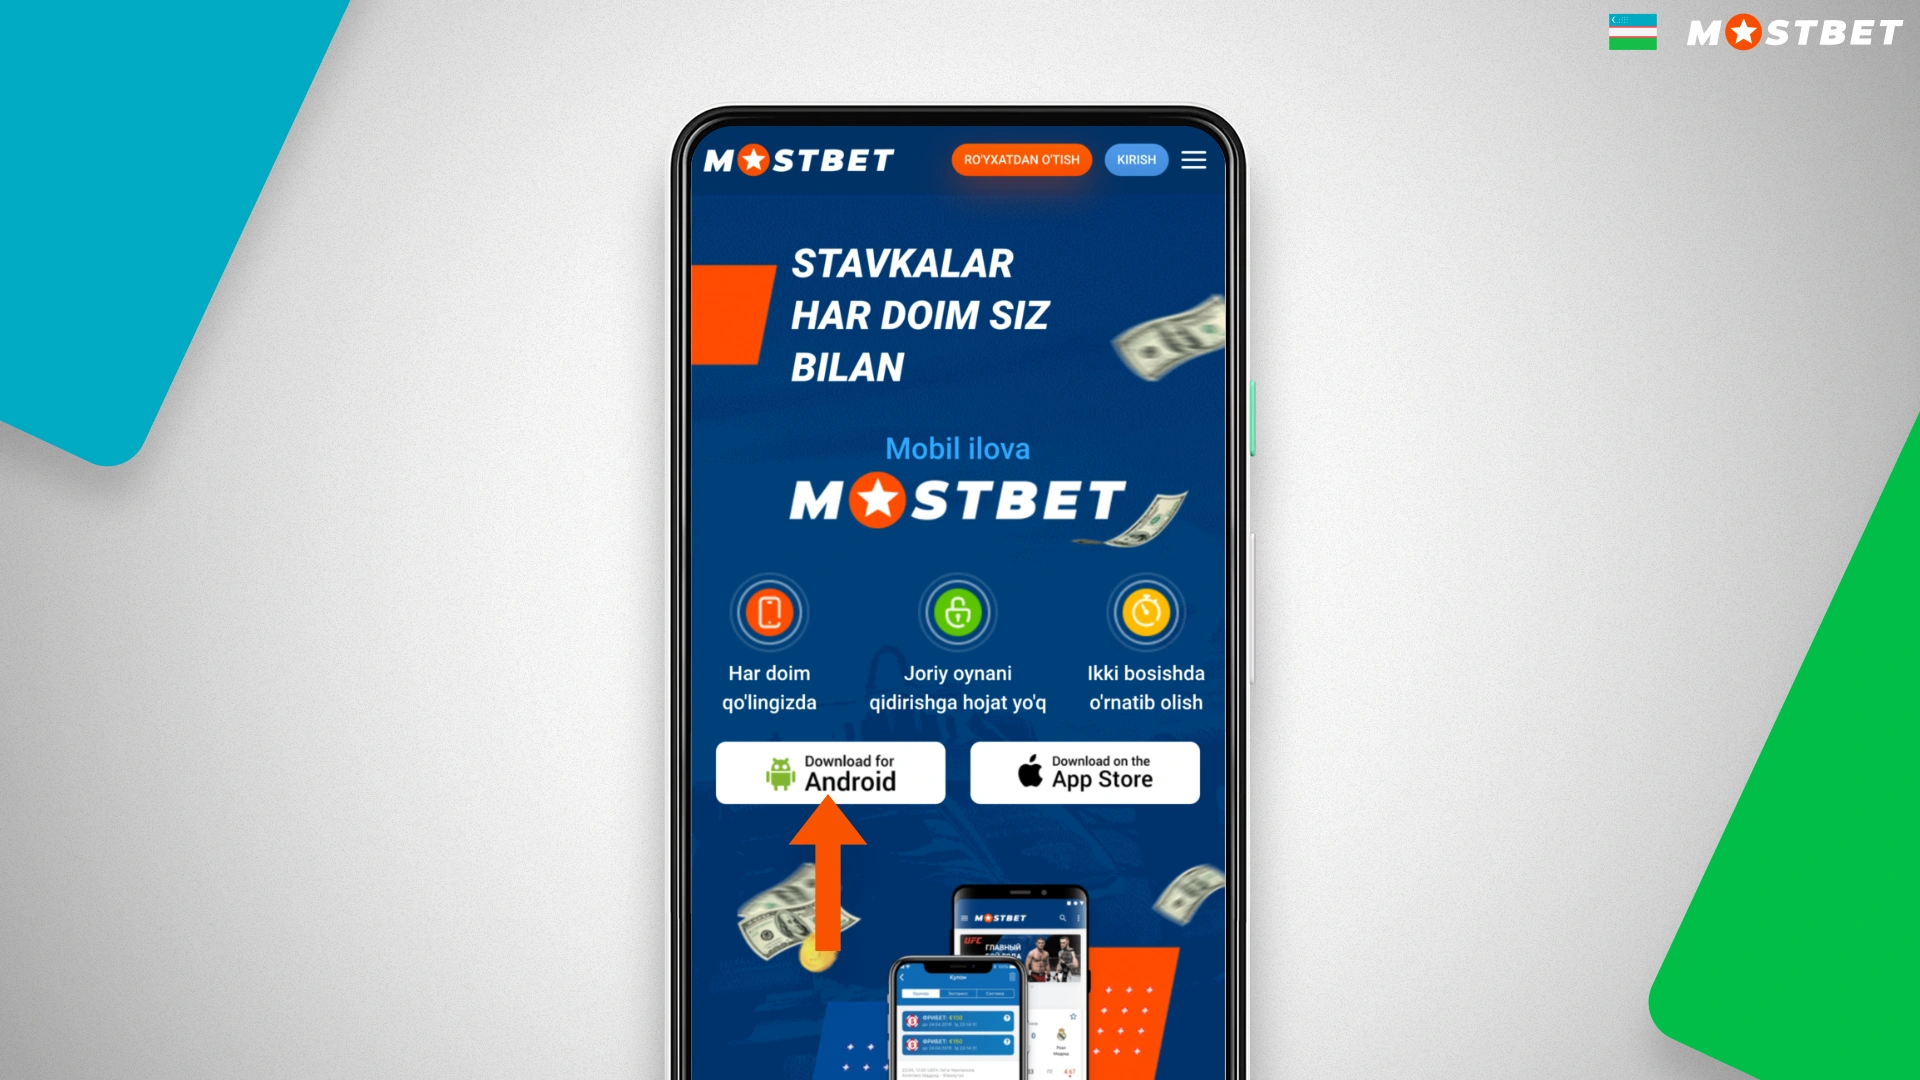 A step-by-step guide on how to download and install Mostbet app on android